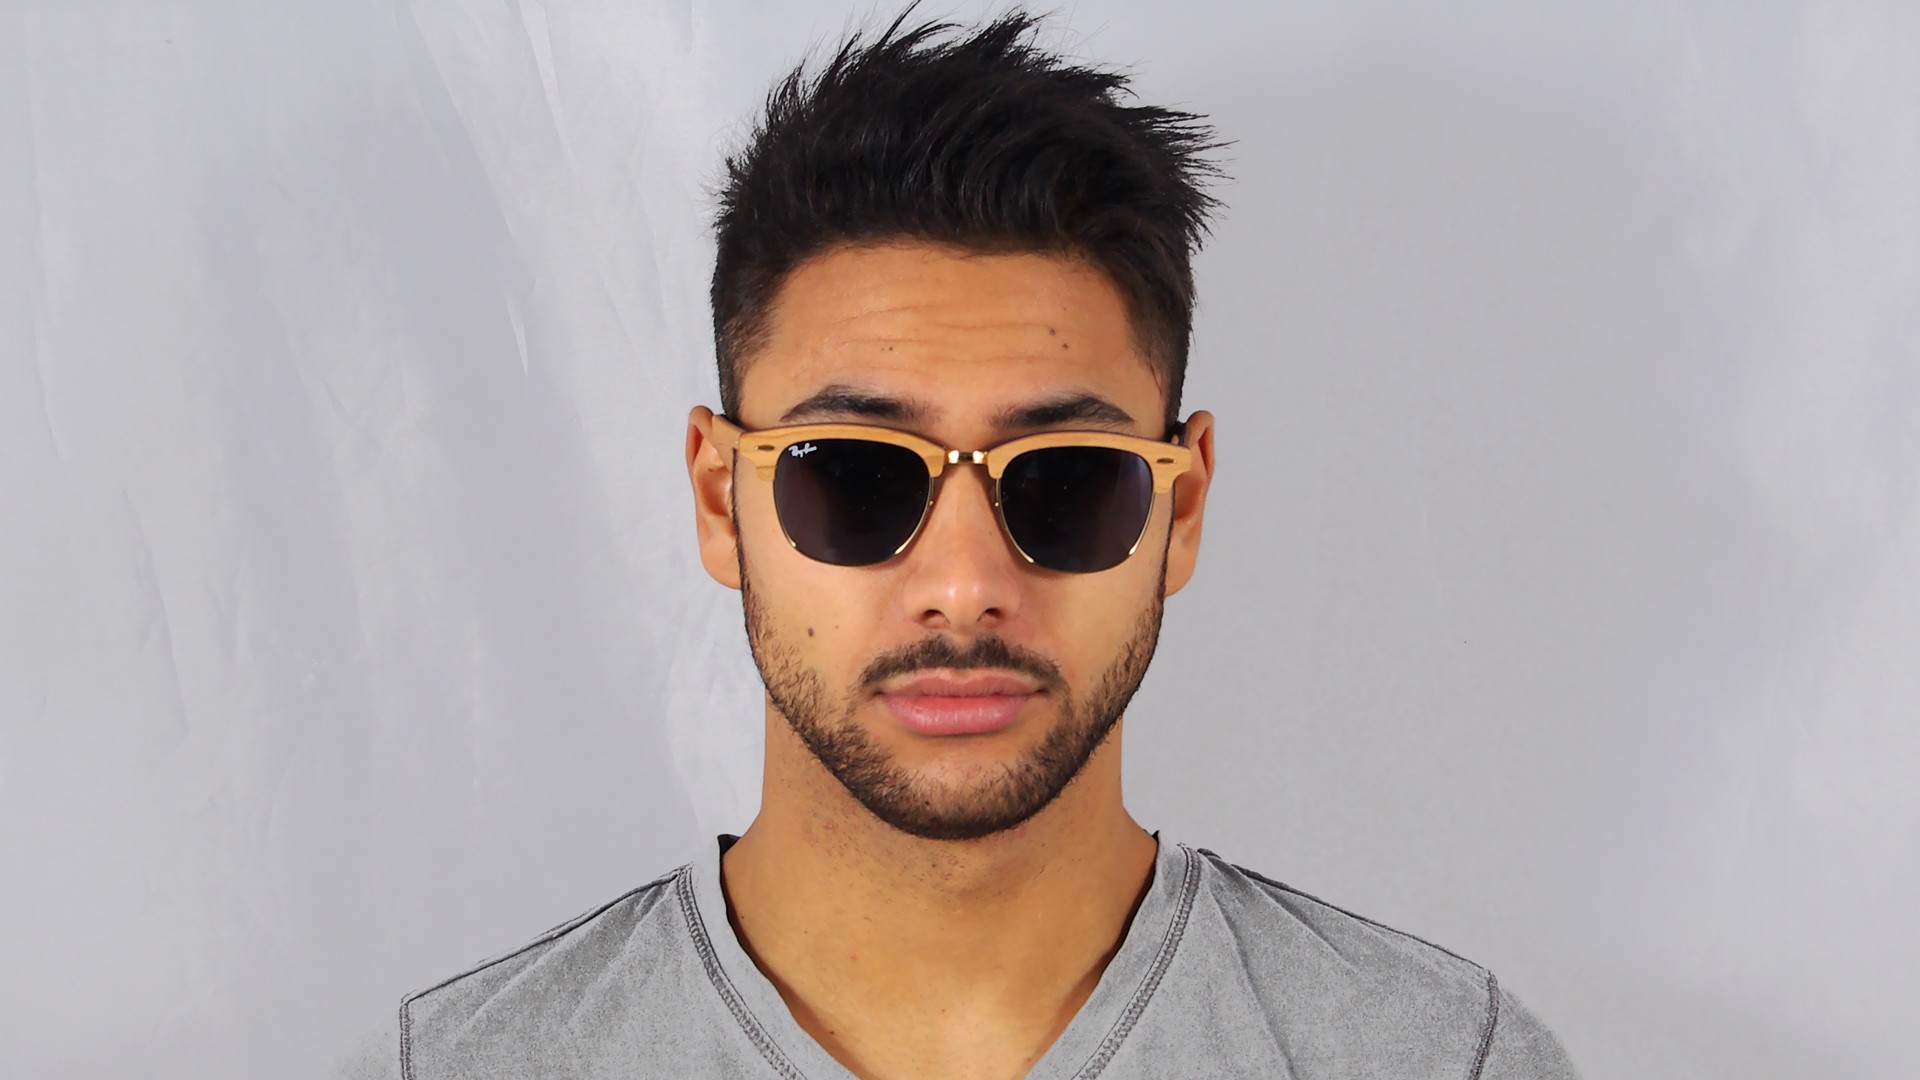 Ray Ban Clubmaster Glasses On Face 815ba1